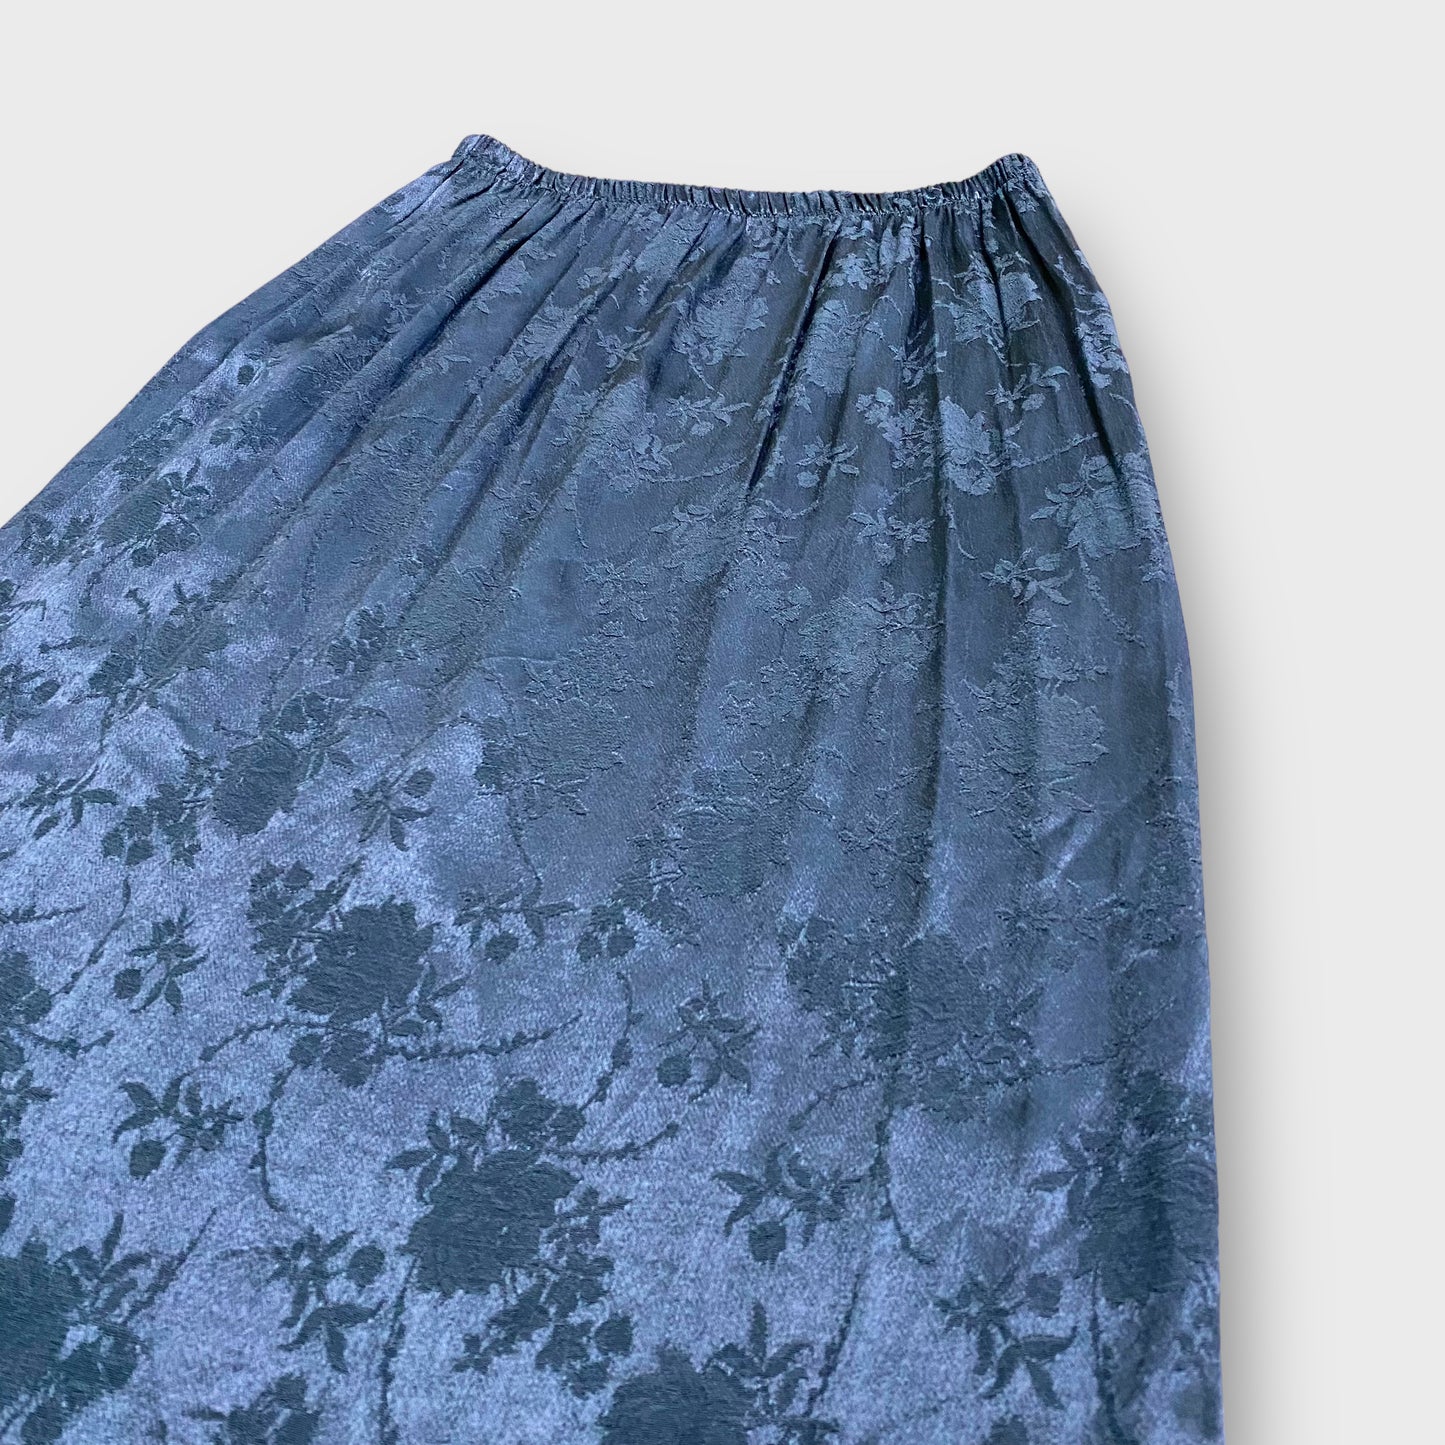 Flower pattern lace mid maxi length skirt